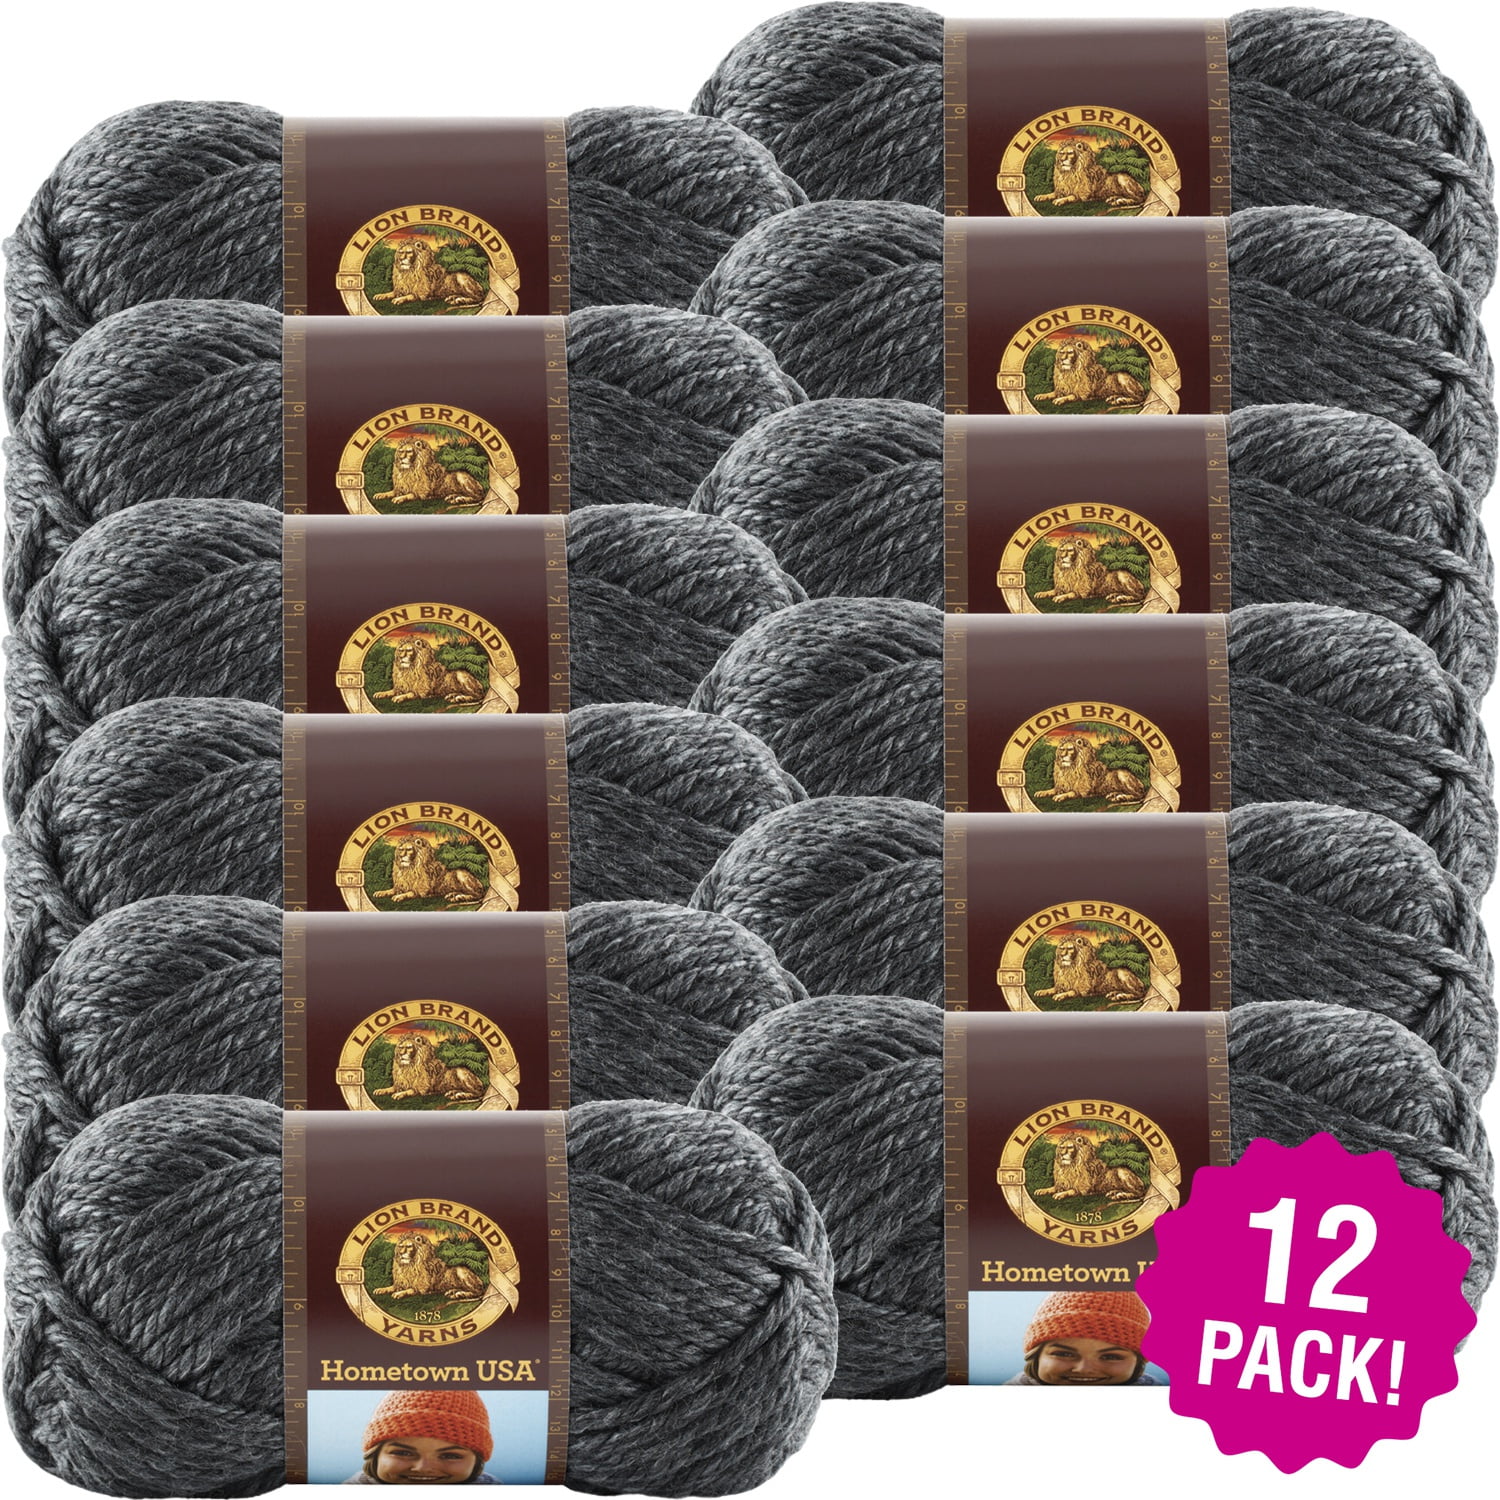 Lion Brand Multipack of 6 Chicago Charcoal Hometown USA Yarn 